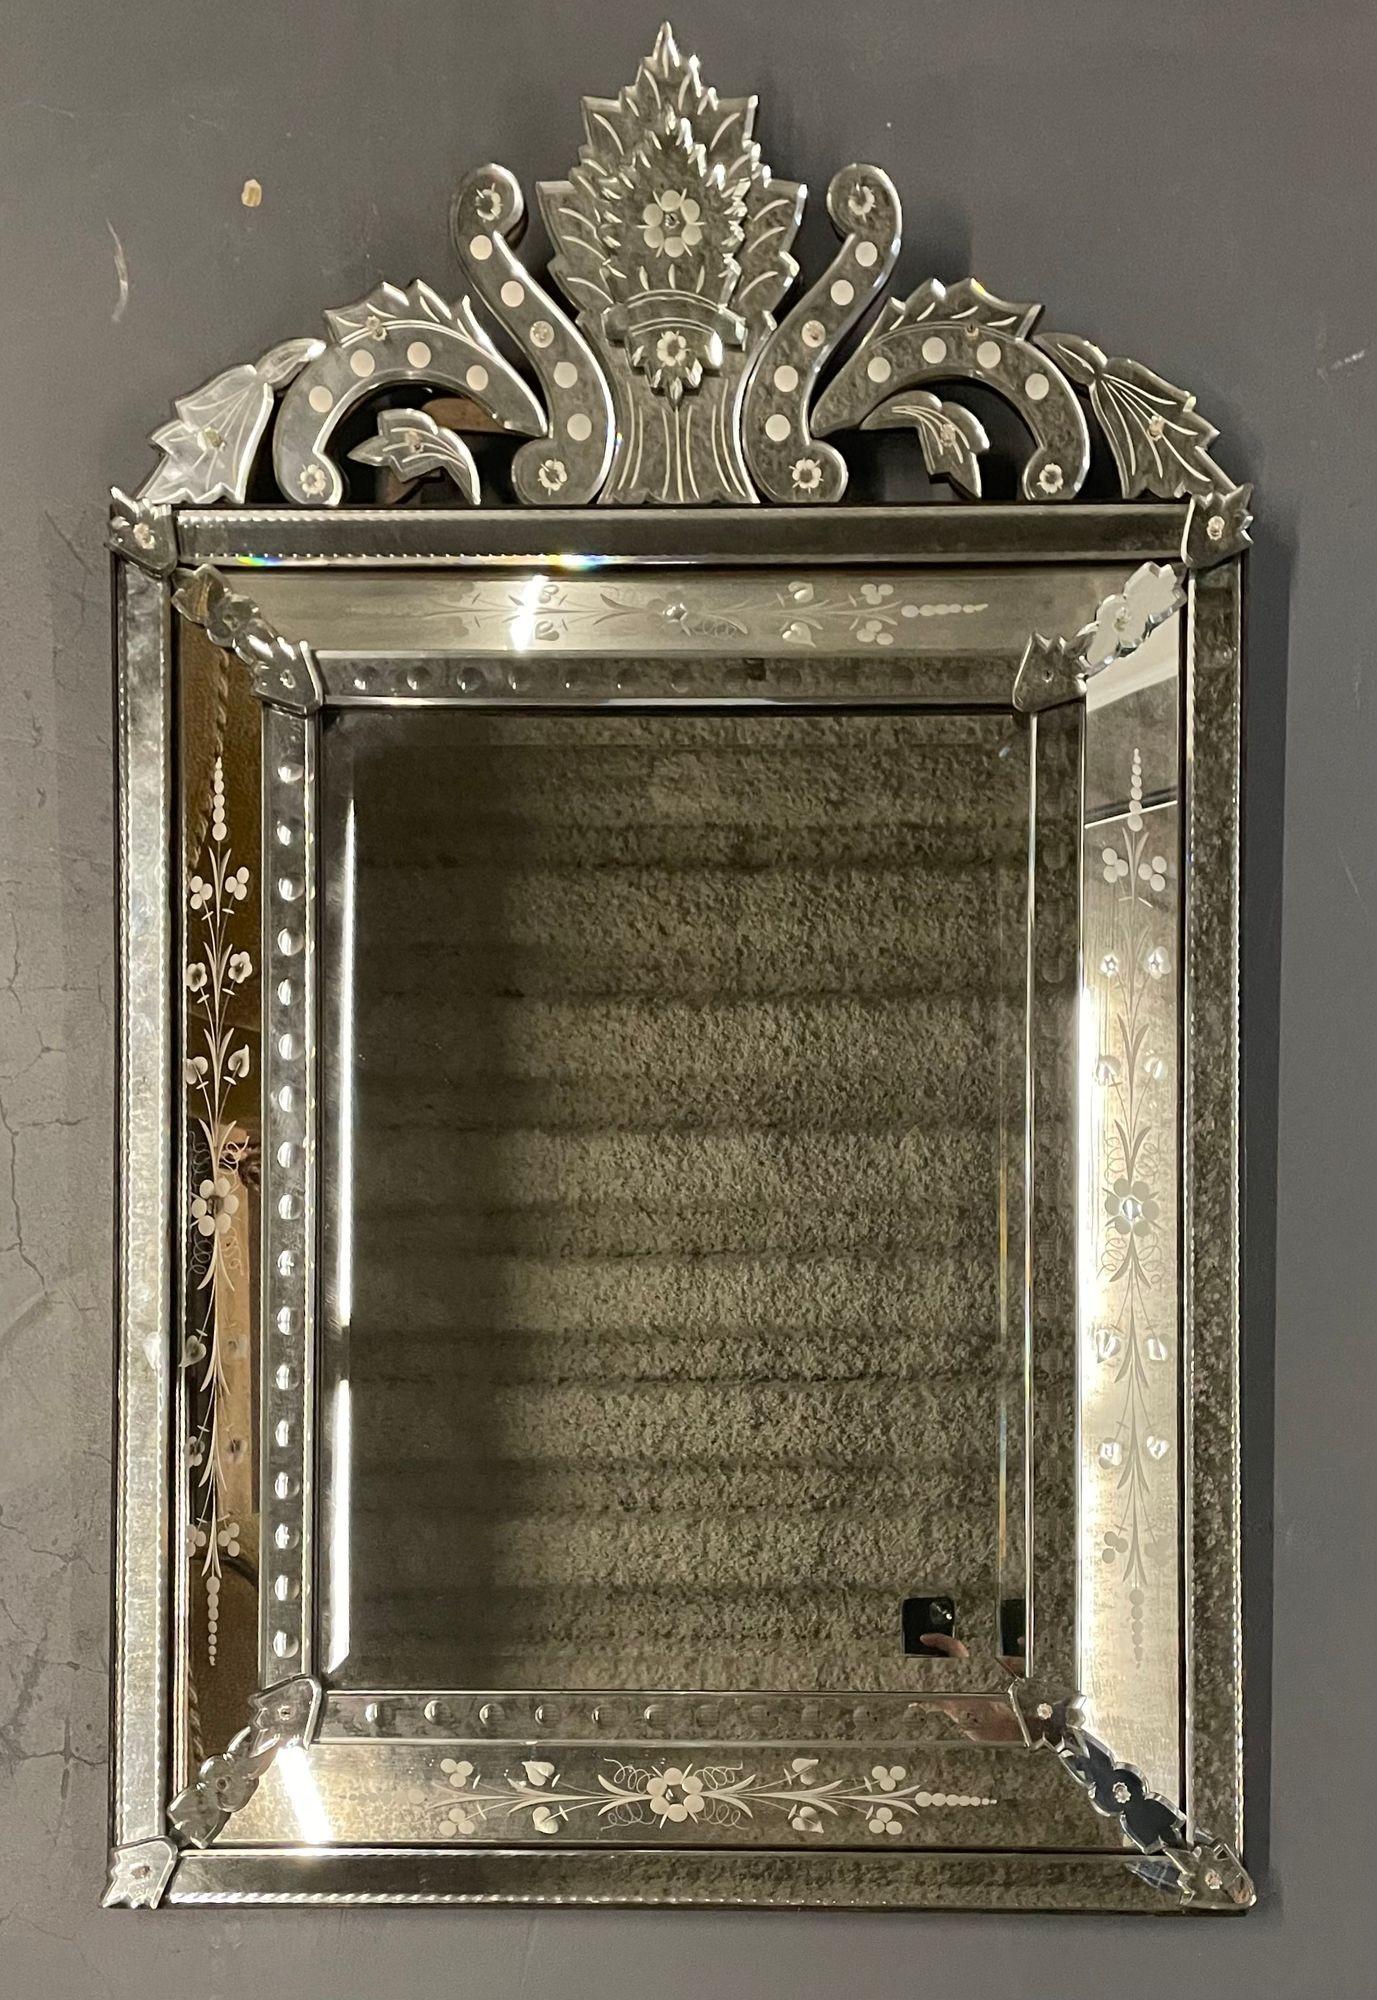 A Venetian Etched glass, beveled wall, console or pier mirror
 
A shimmering and bouyant venetian etched glass wall, console or pier mirror articulated by an all around beveled design. Accented by shadow-box sides and a finely crafted pediment